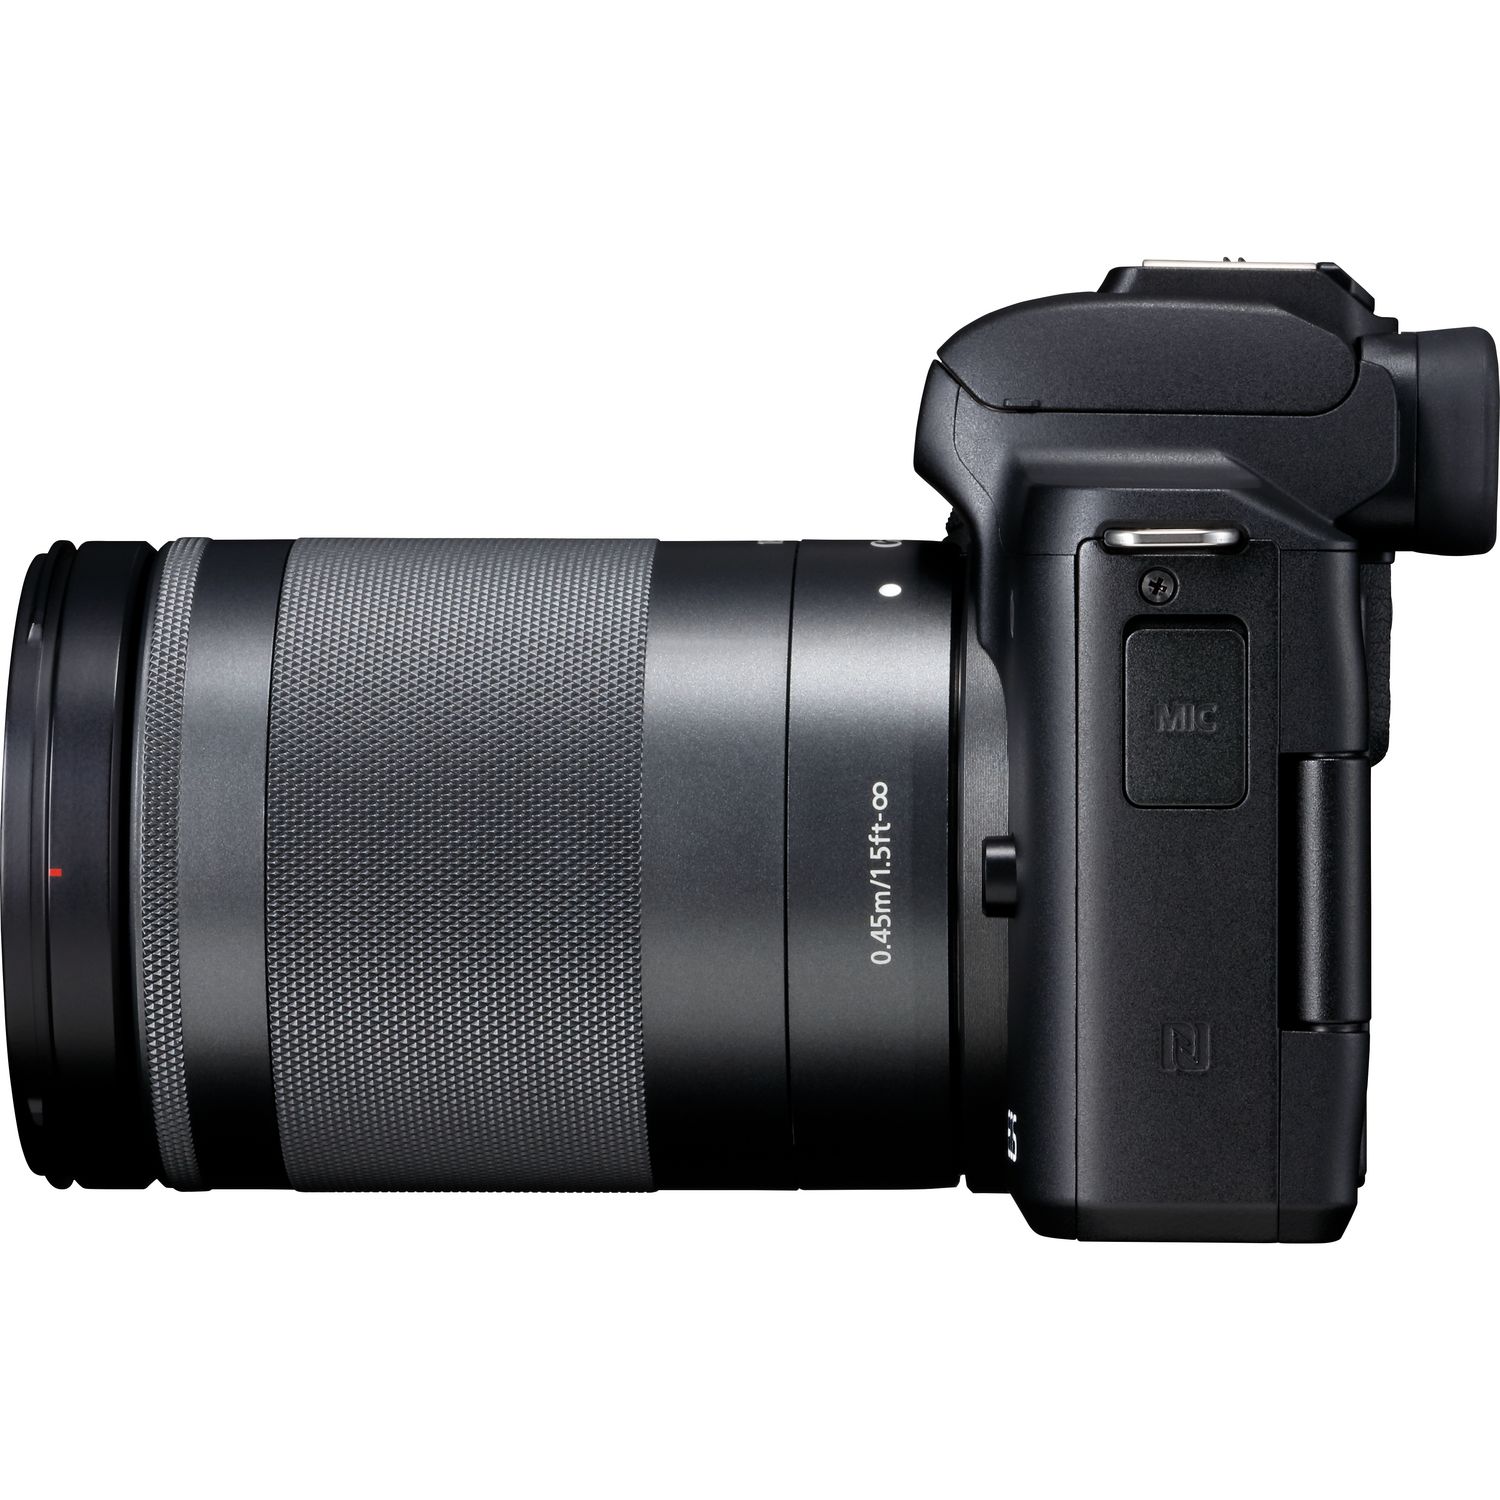 Canon M50 Mirrorless Camera with EFM 18150mm IS STM Lens